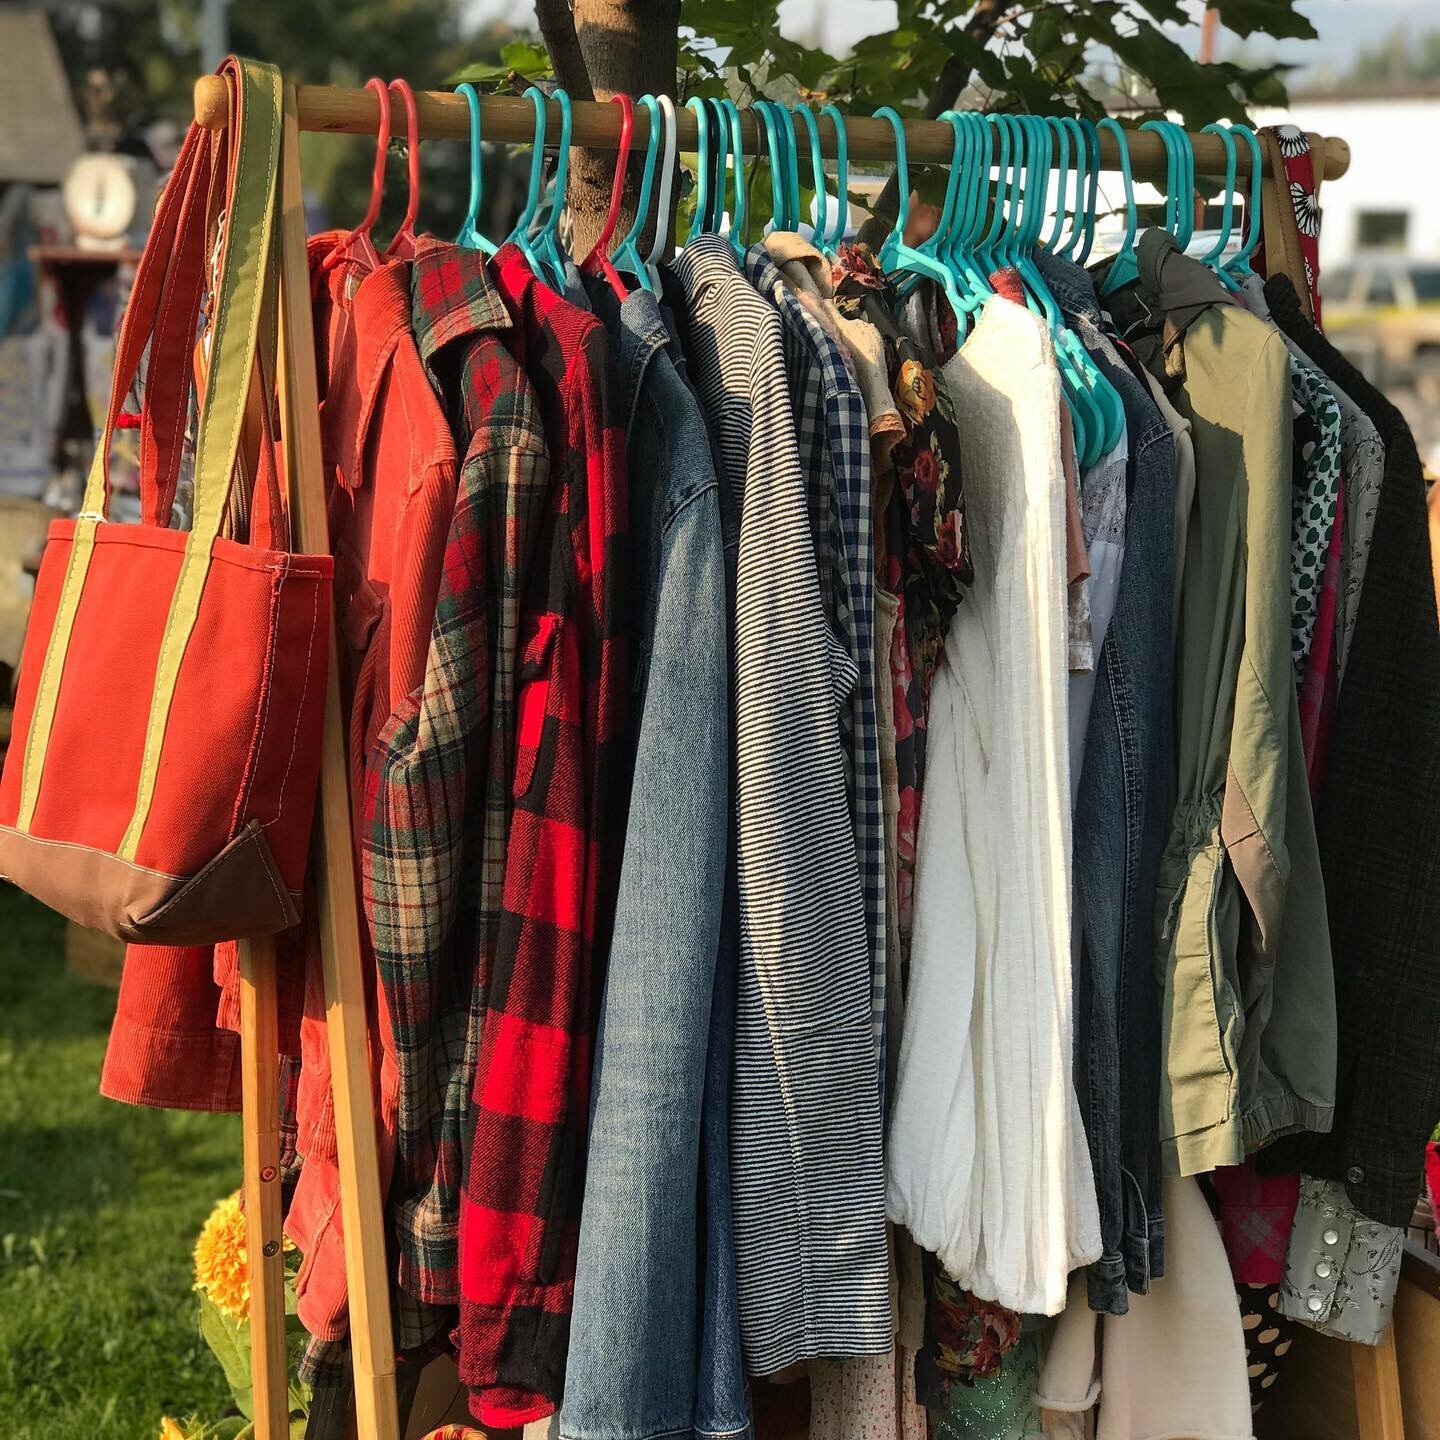 ONE MORE GIVEAWAY! 

This is your final opportunity to enter to win a pair of early bird tickets and $50 to spend at our May 6 vintage market at The Historic Fort Missoula:
🤍 follow our account if you don&rsquo;t already
🤍 like this post
🤍 tag two